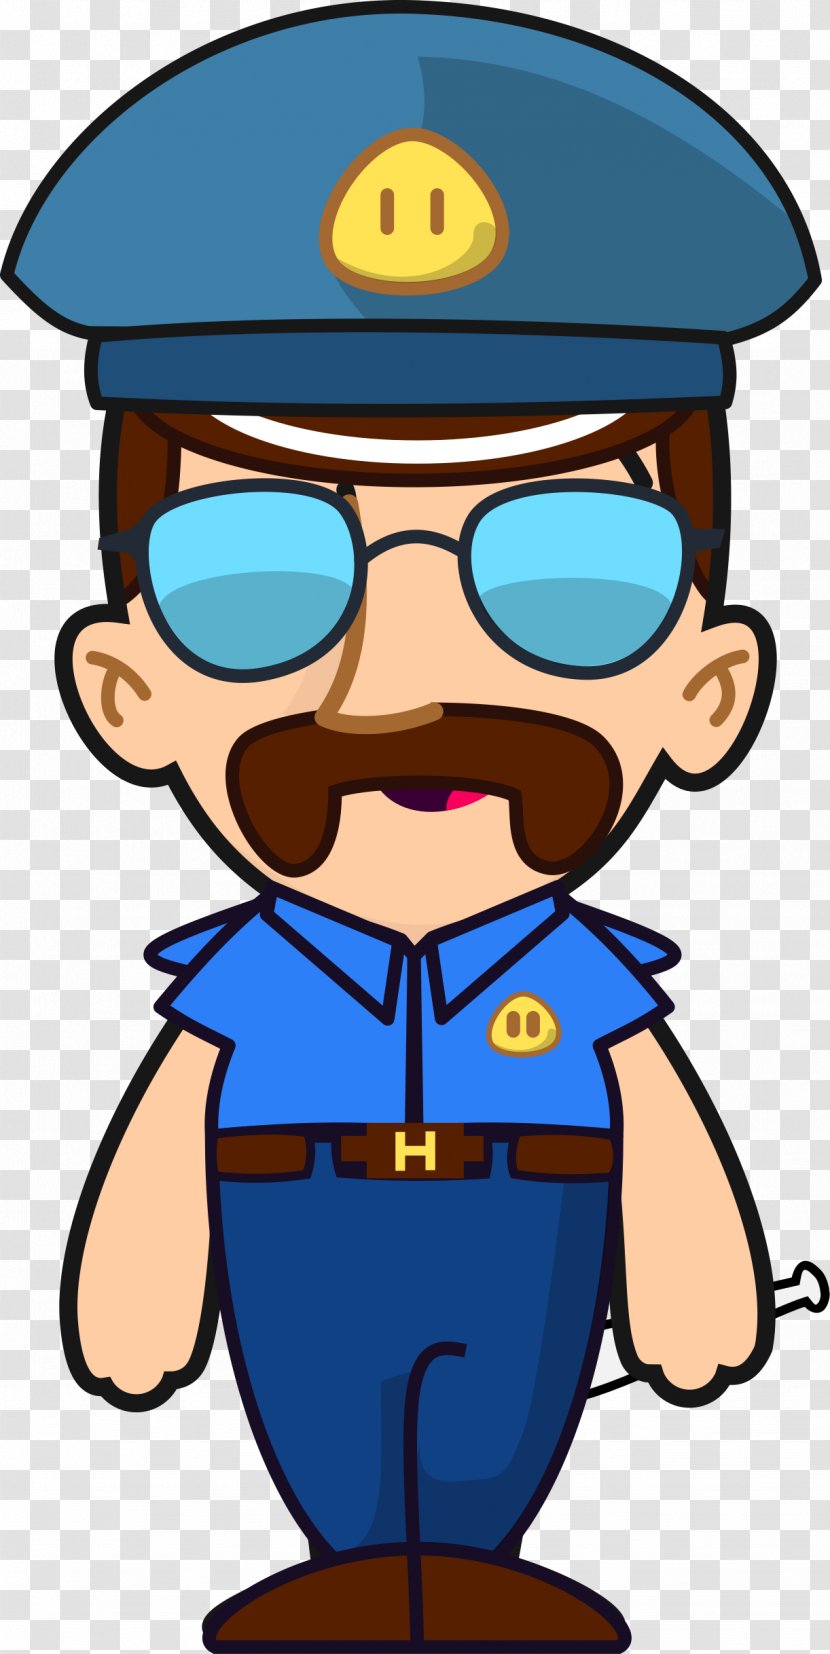 Cartoon Police Officer Drawing Station - Qversion Transparent PNG